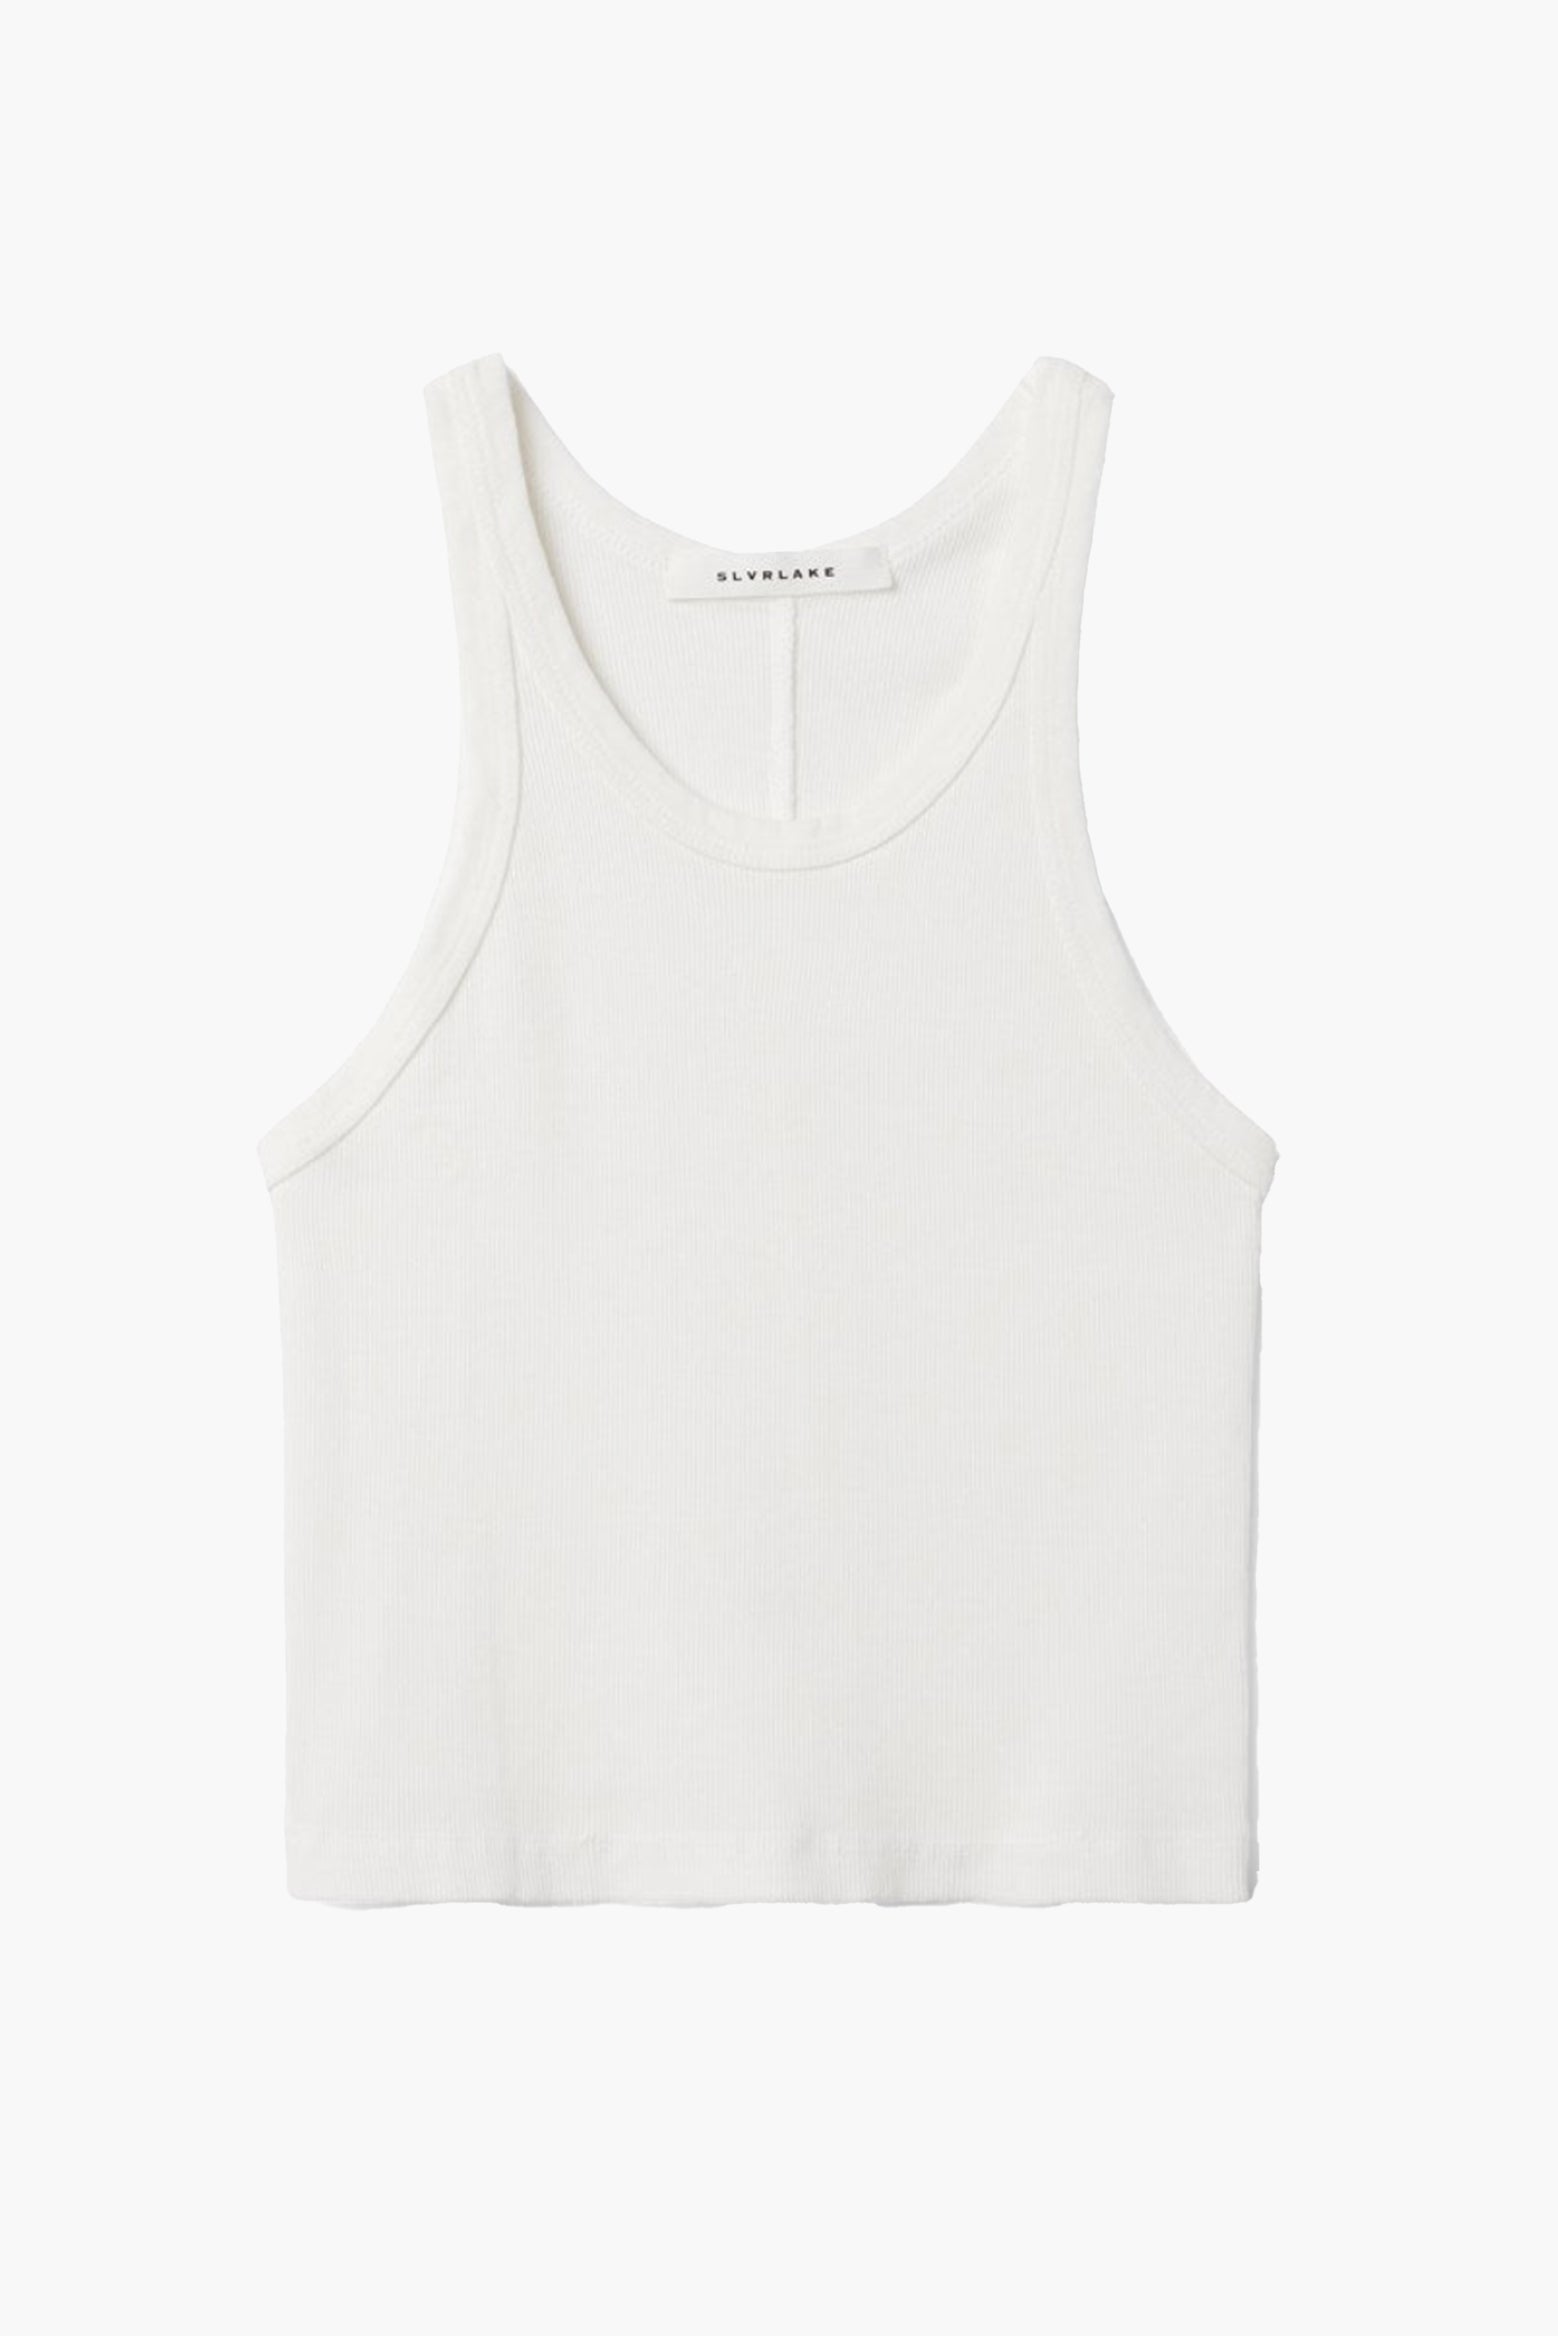 SLVRLAKE Baby Tank in Natural White available at The New Trend Australia.